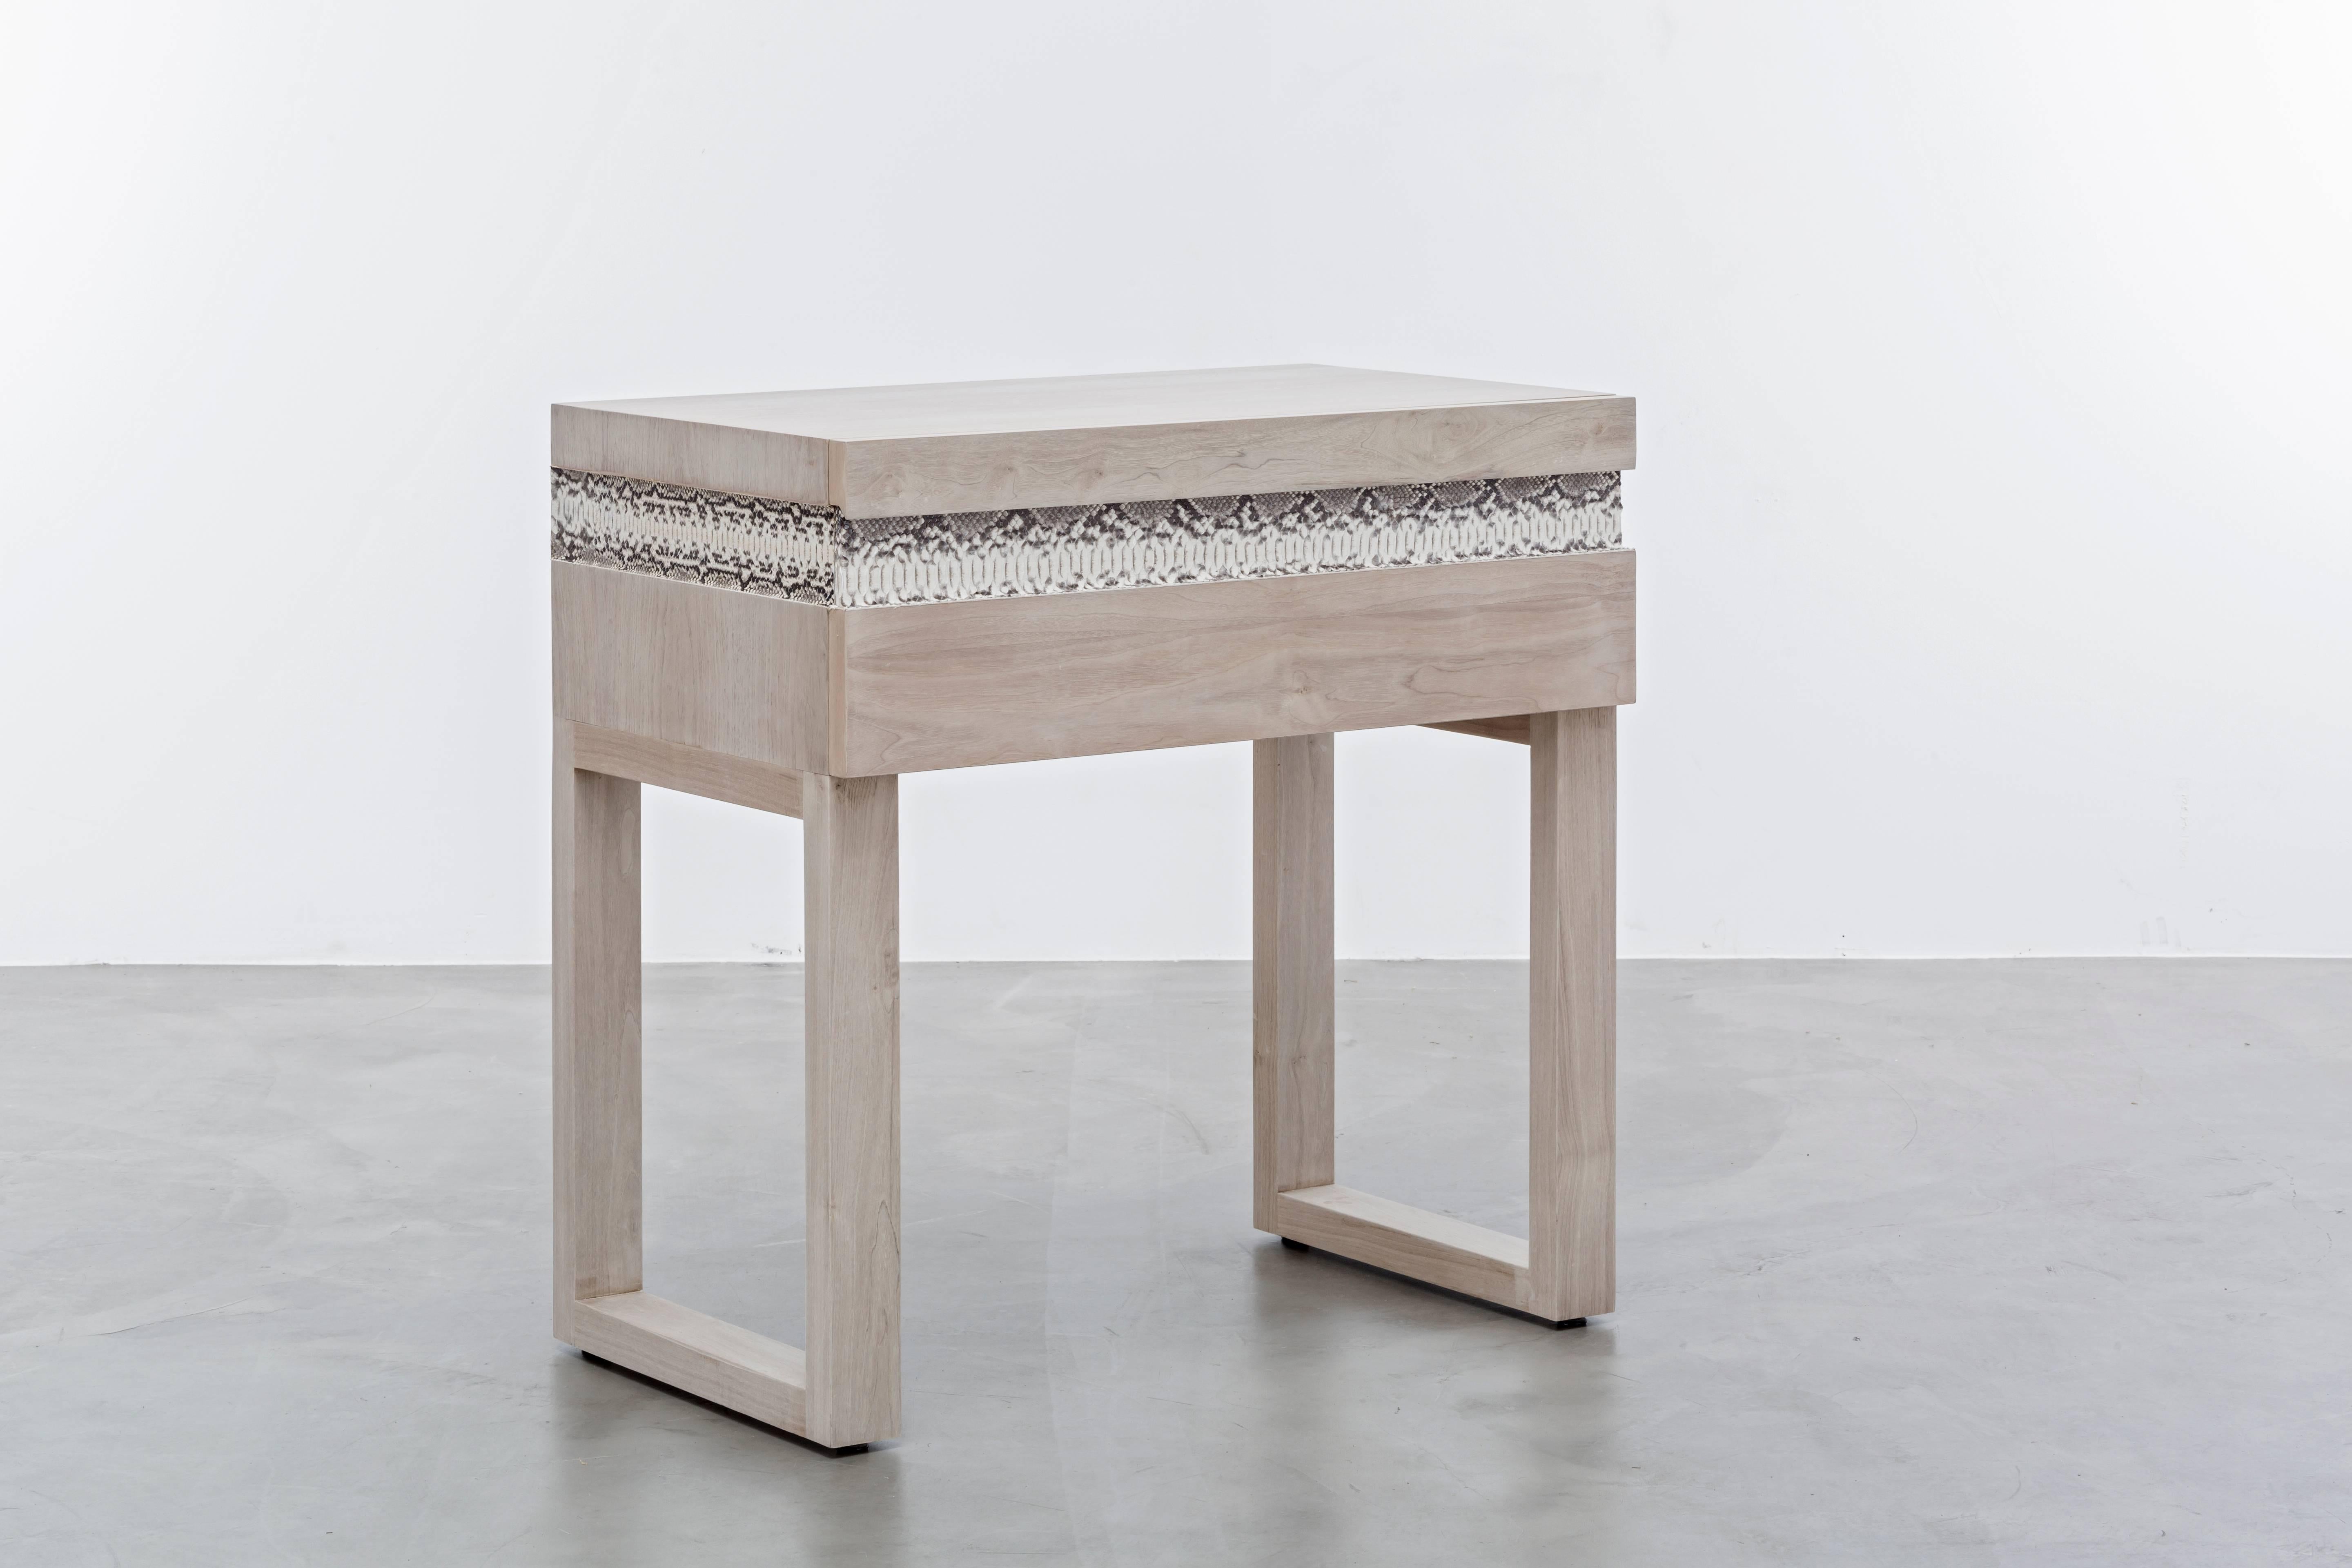 SIMONE NIGHTSTAND - Bleached White Oak Side TAble with Authentic Snakeskin

The Simone nightstand is a beautifully crafted piece of furniture that showcases a unique and luxurious design. It features a bleached walnut body that provides a natural